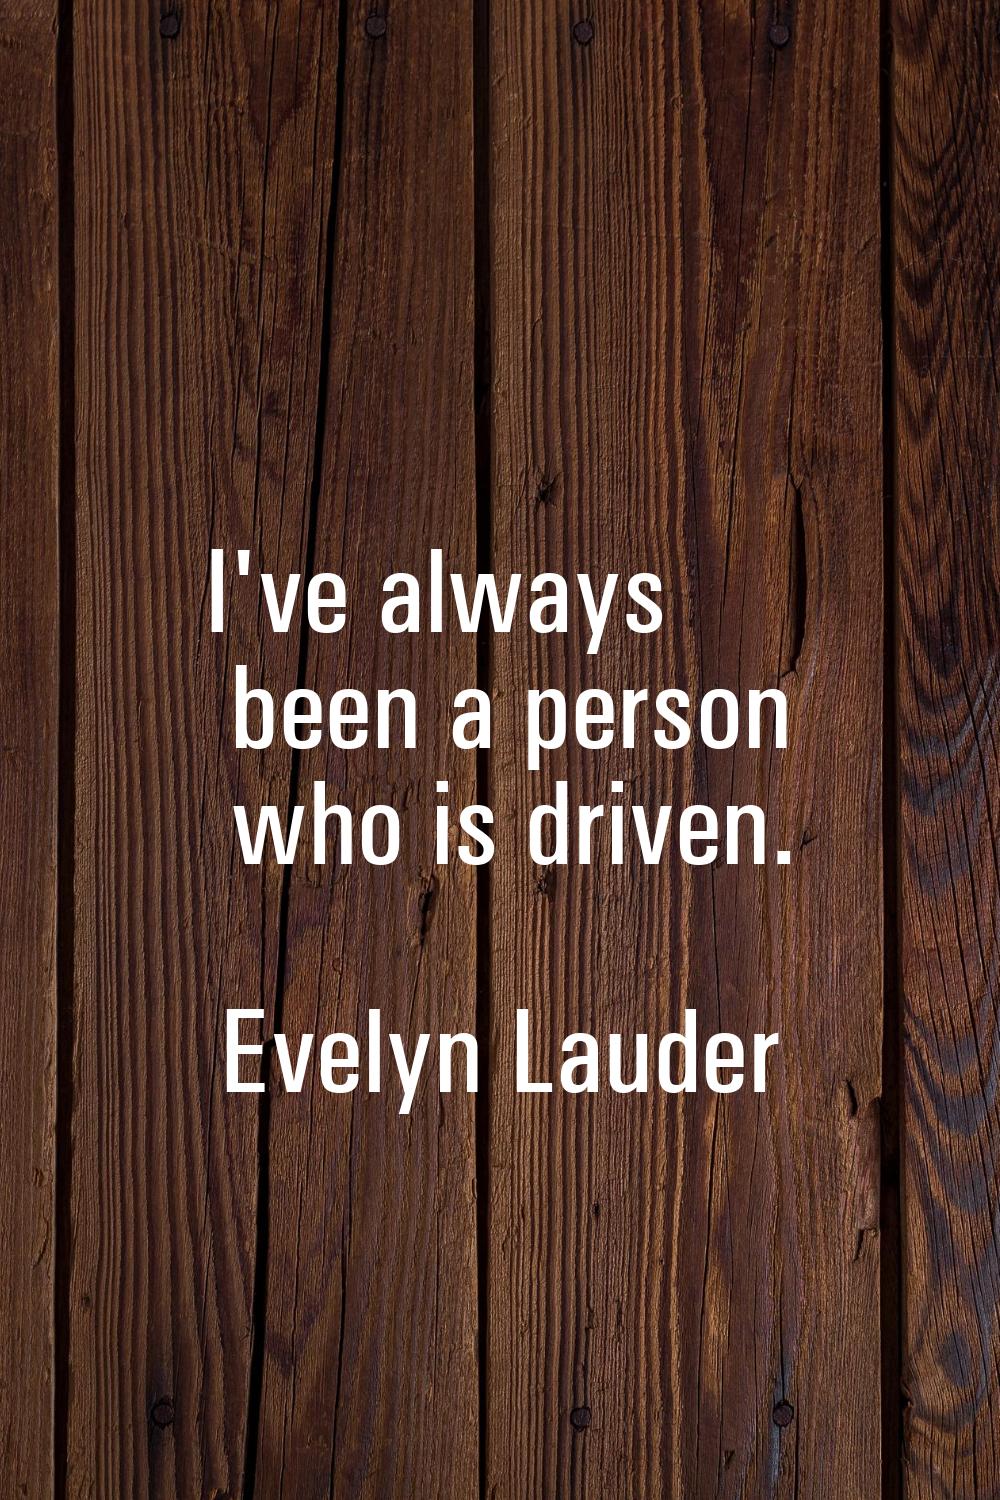 I've always been a person who is driven.